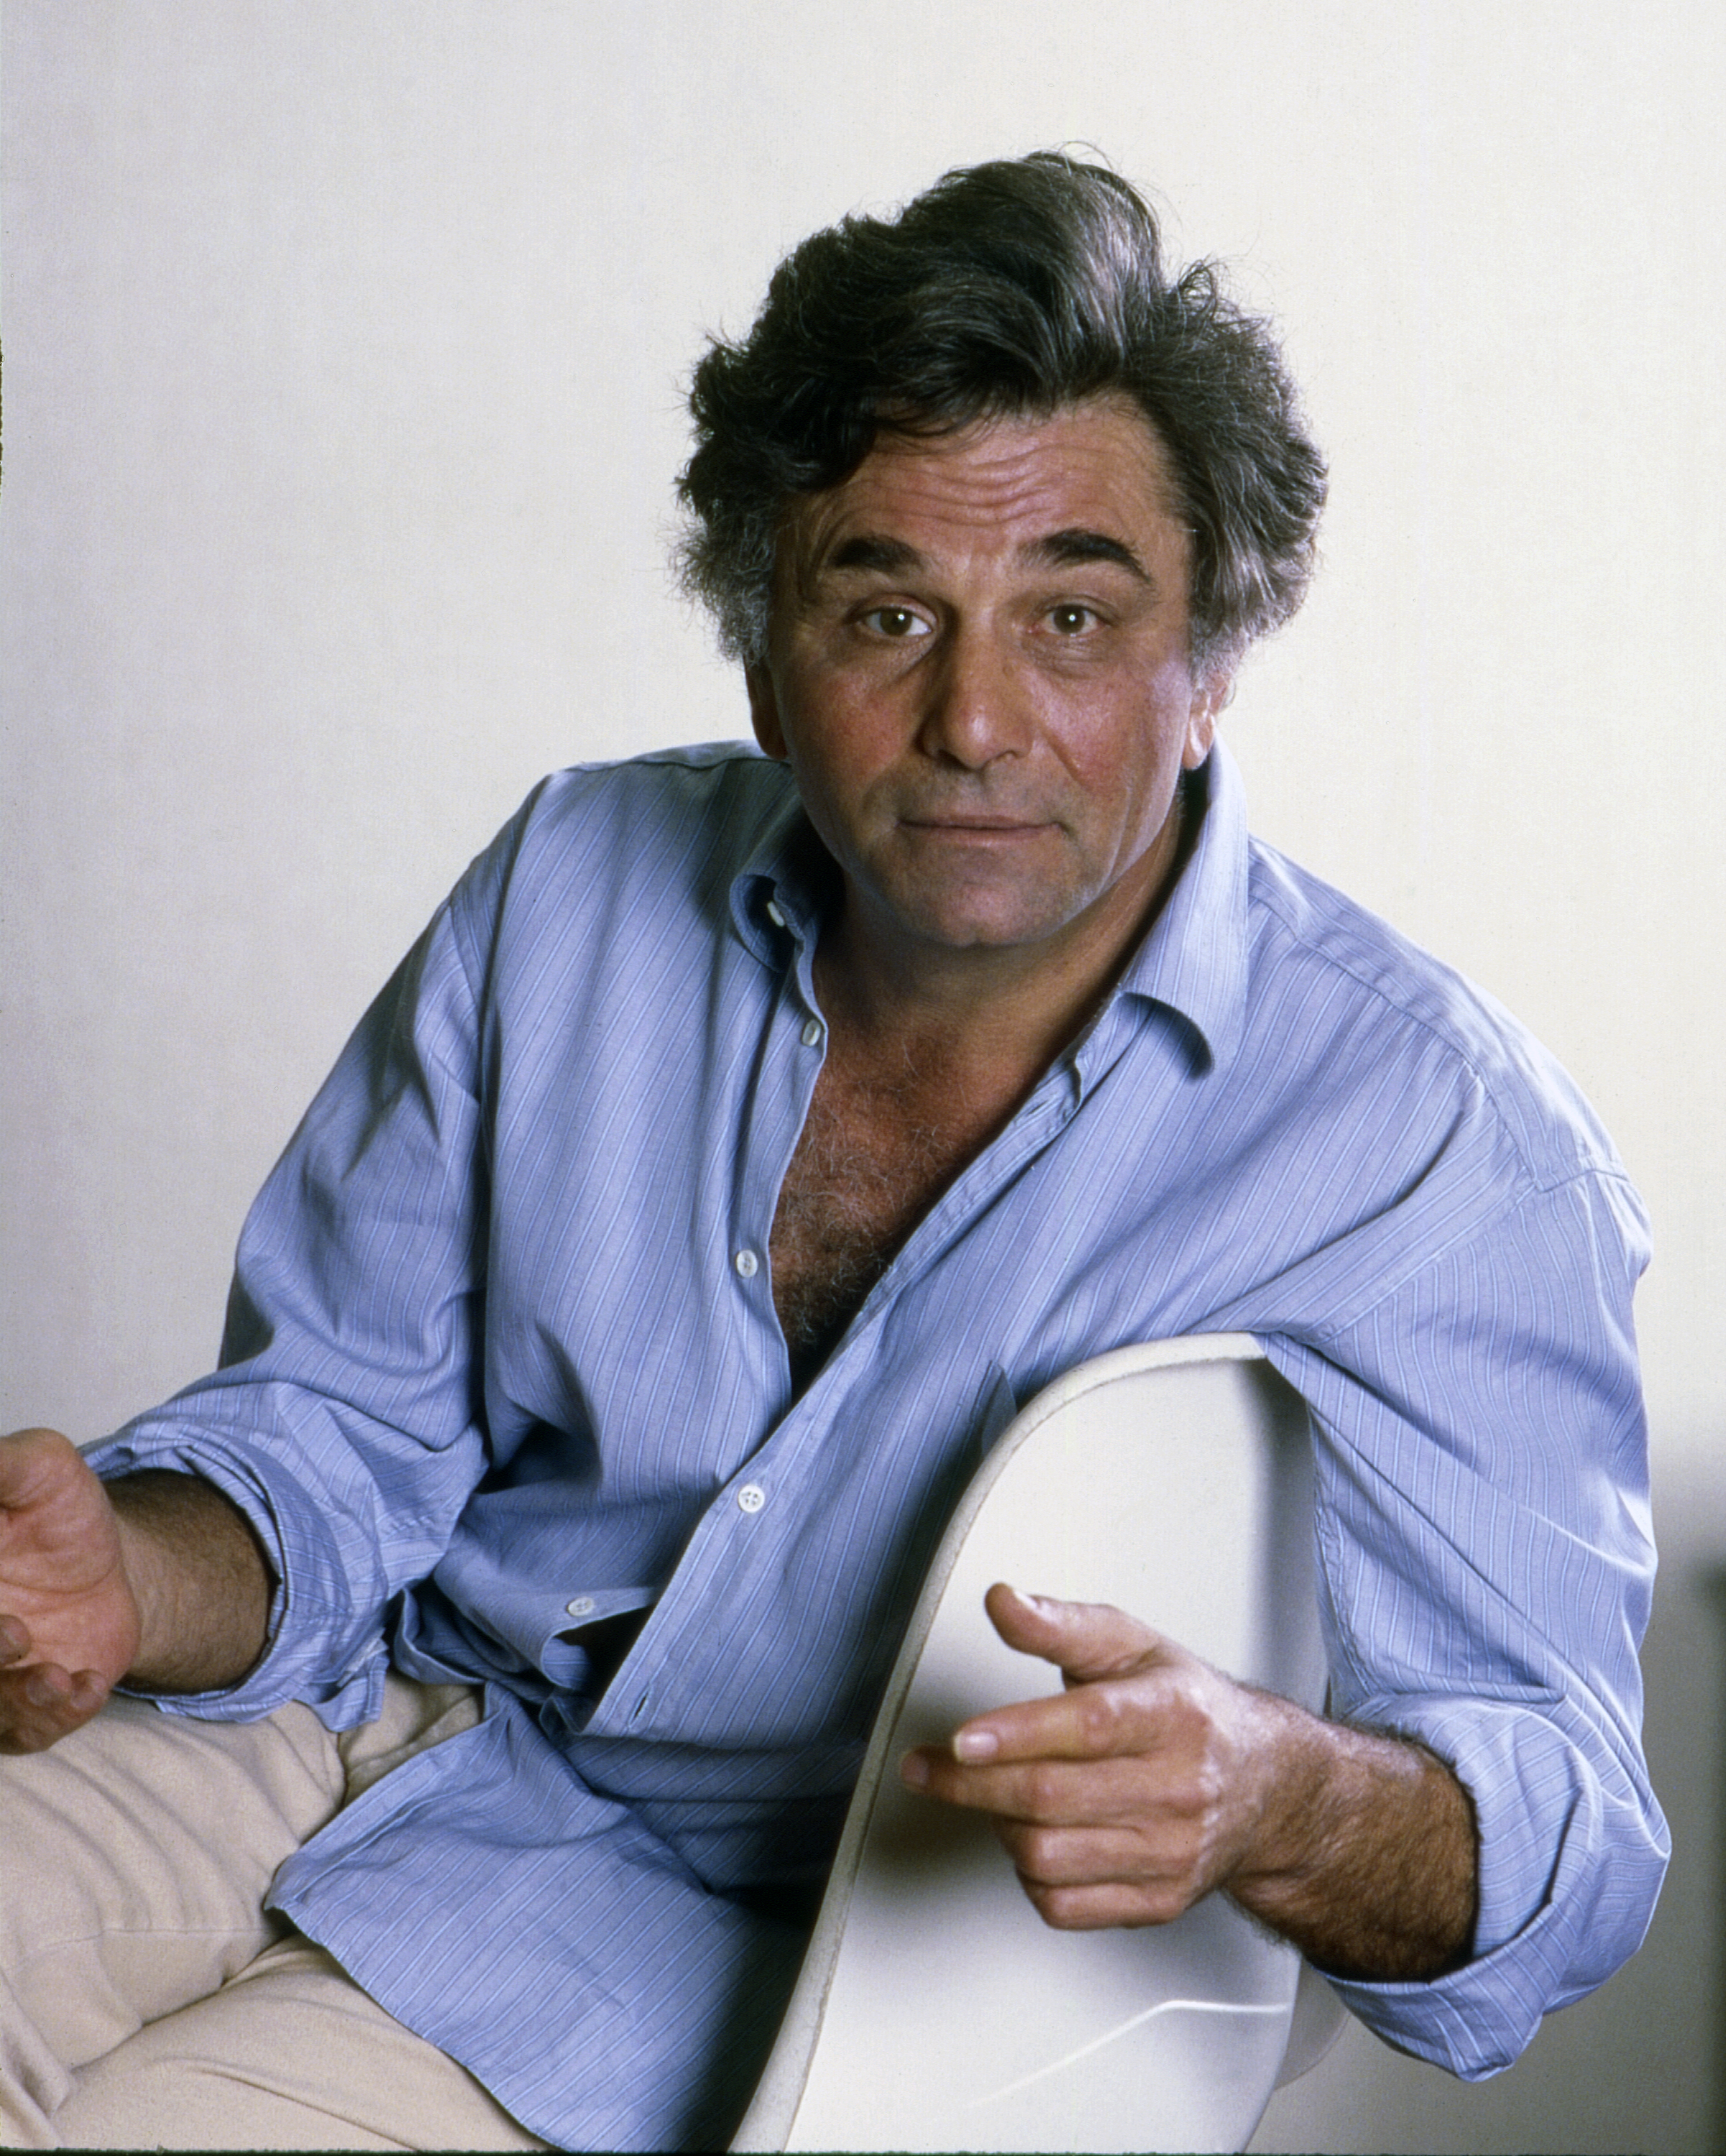 Peter Falk during a photo session circa 1985 in Los Angeles, California | Source: Getty Images